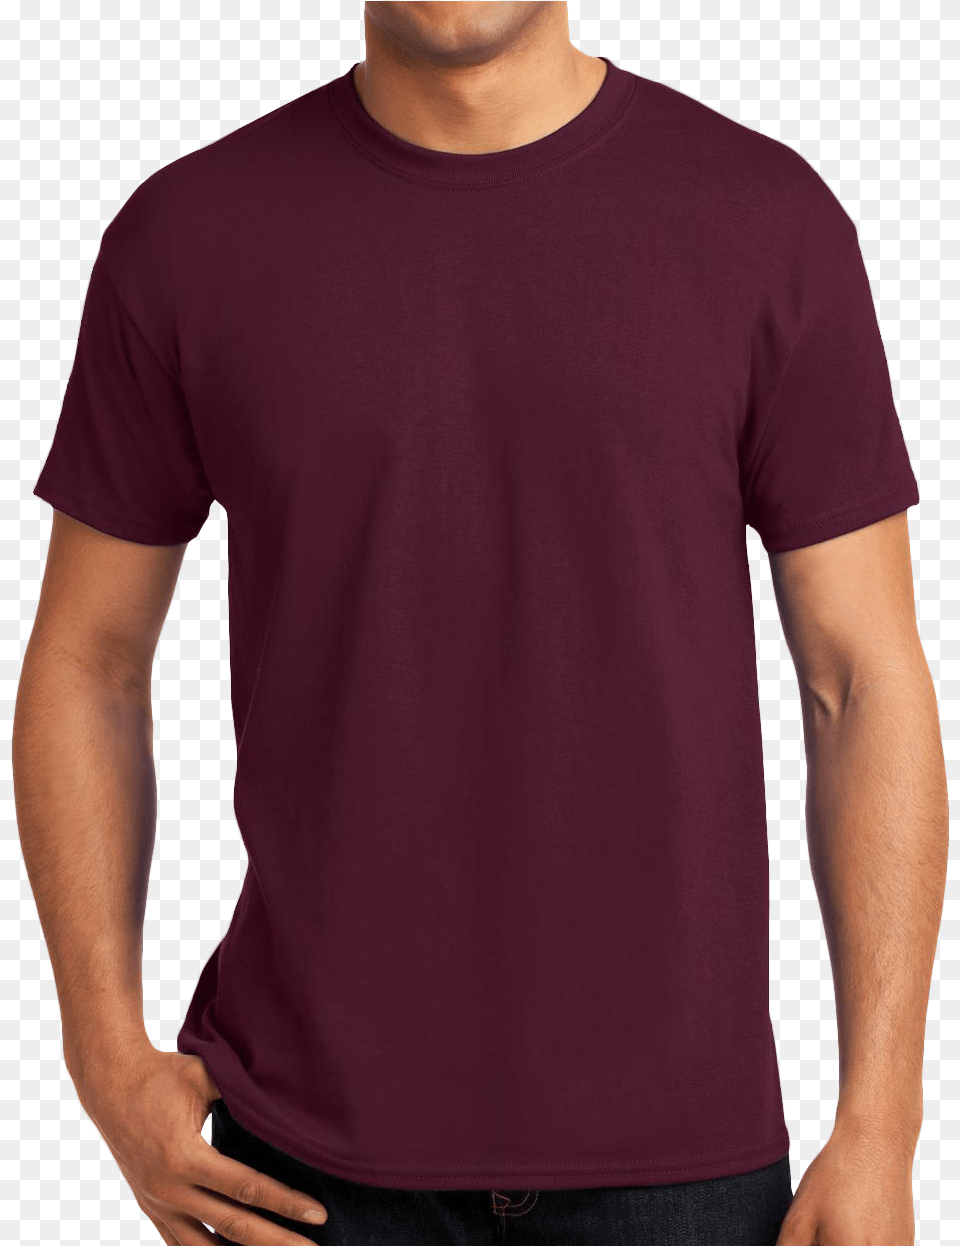 Comfortblend Ecosmart 5050 Cottonpoly T Shirt Hanes Maroon, Clothing, T-shirt, Sleeve Free Png